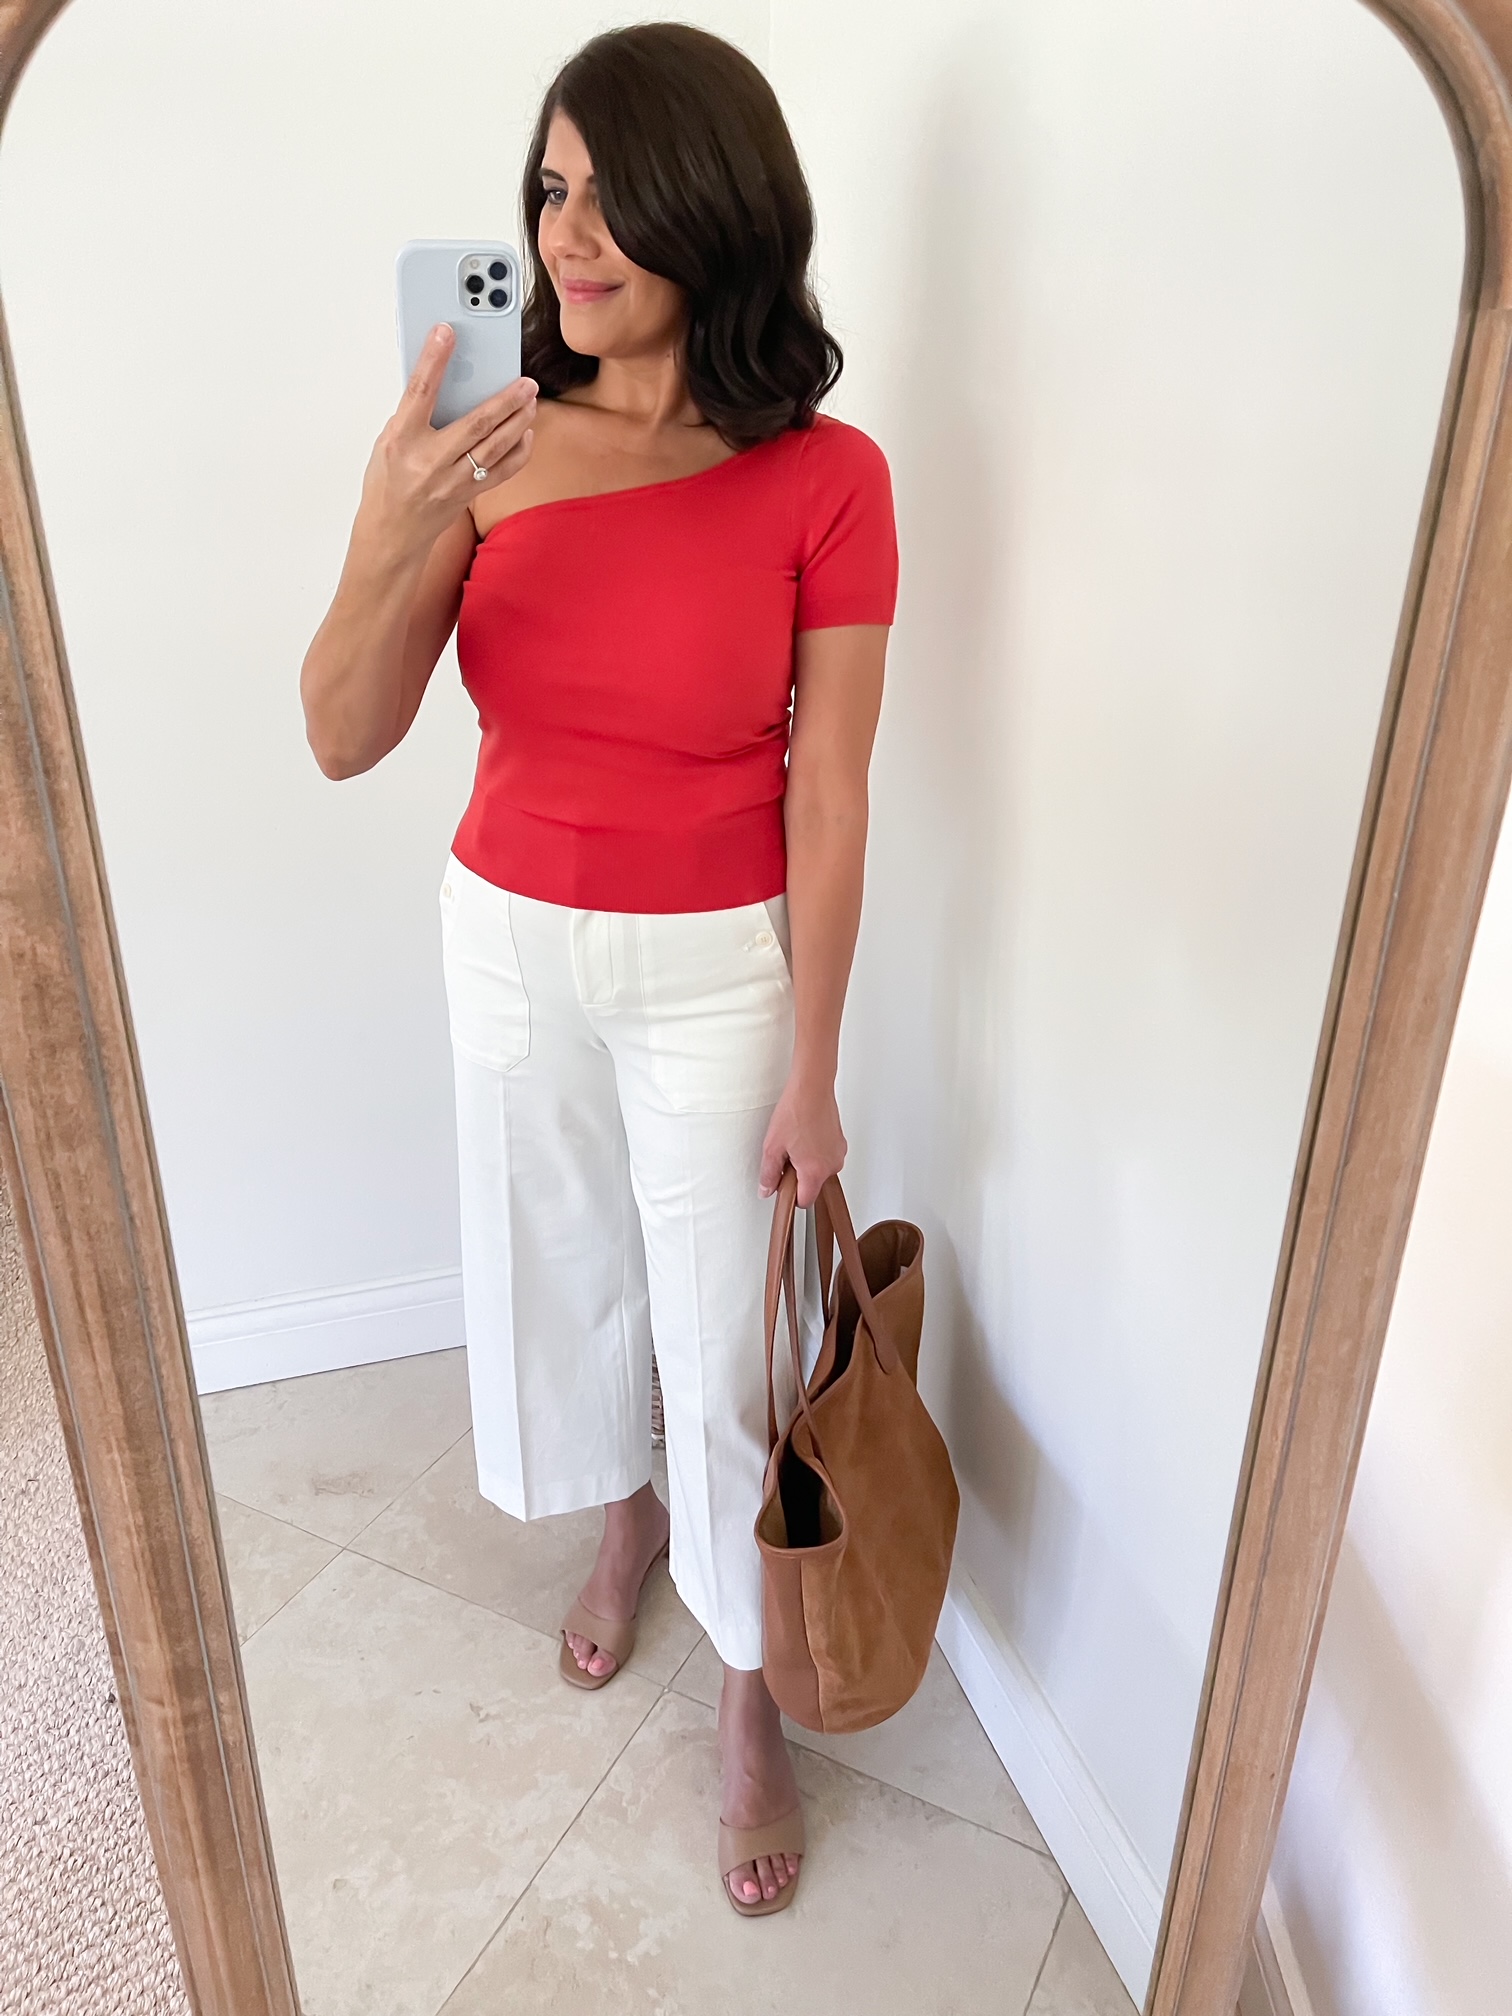 J.CREW WIDE LEG PANTS STYLED 5 WAYS FOR FALL by Desiree Leone of Beautifully Seaside